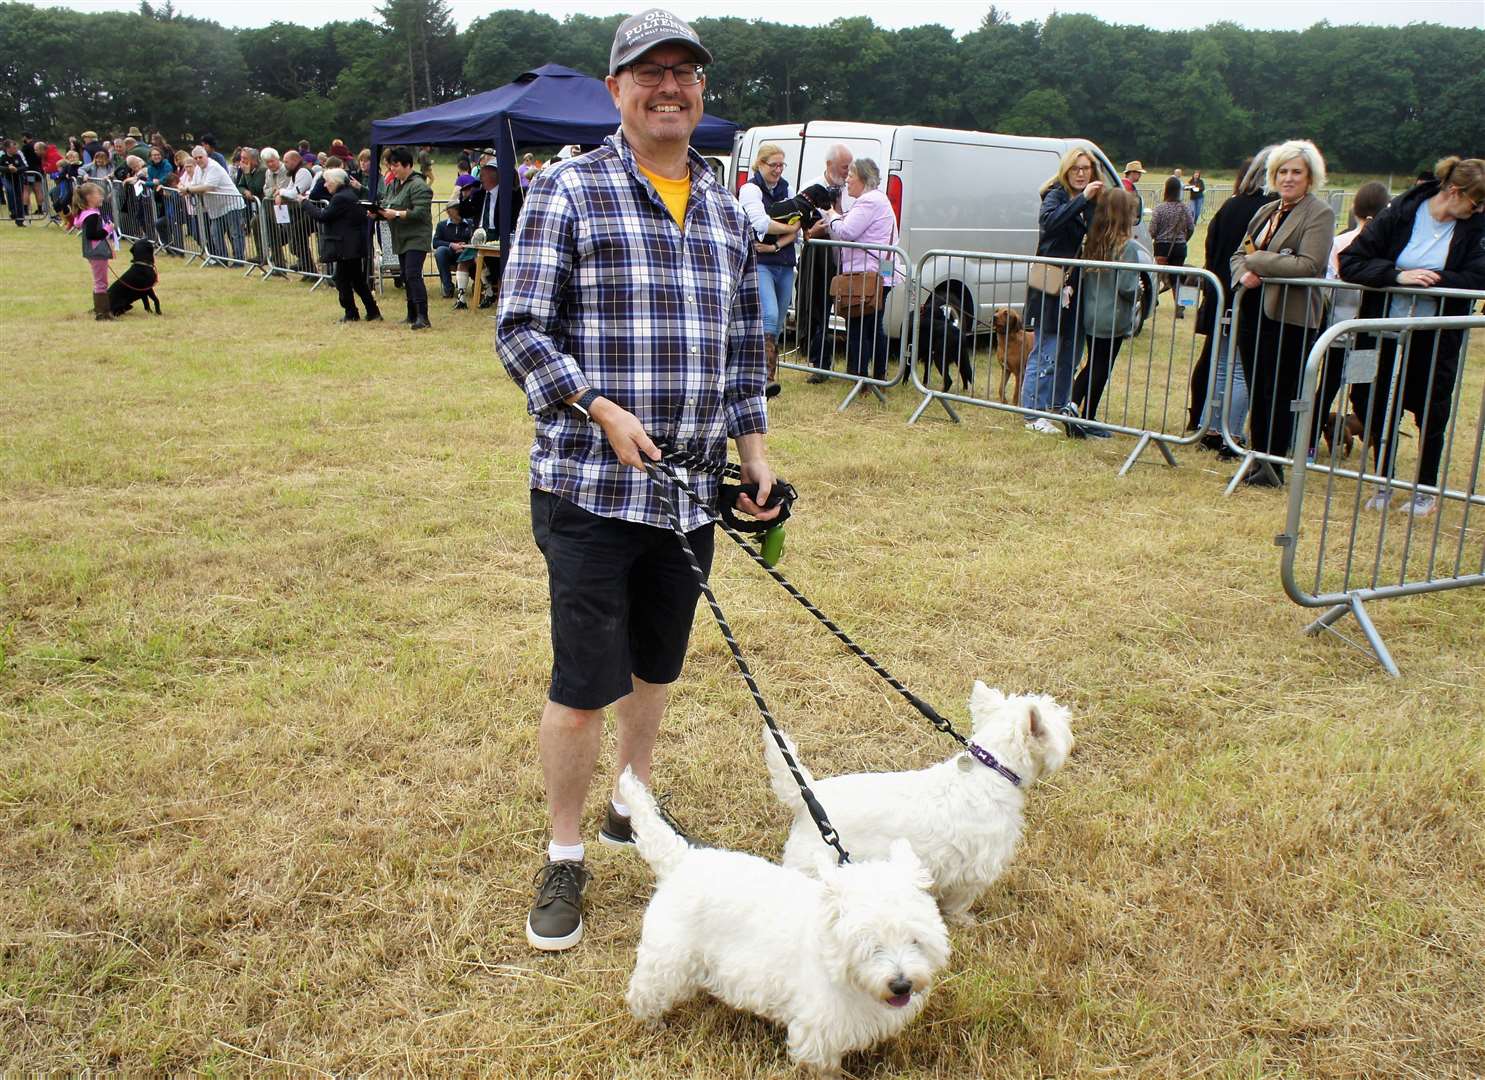 Dounreay managing director Mark Rouse visited the event with his pet dogs. 'Every weekend there's something to do here in Caithness,' he said. Picture: DGS